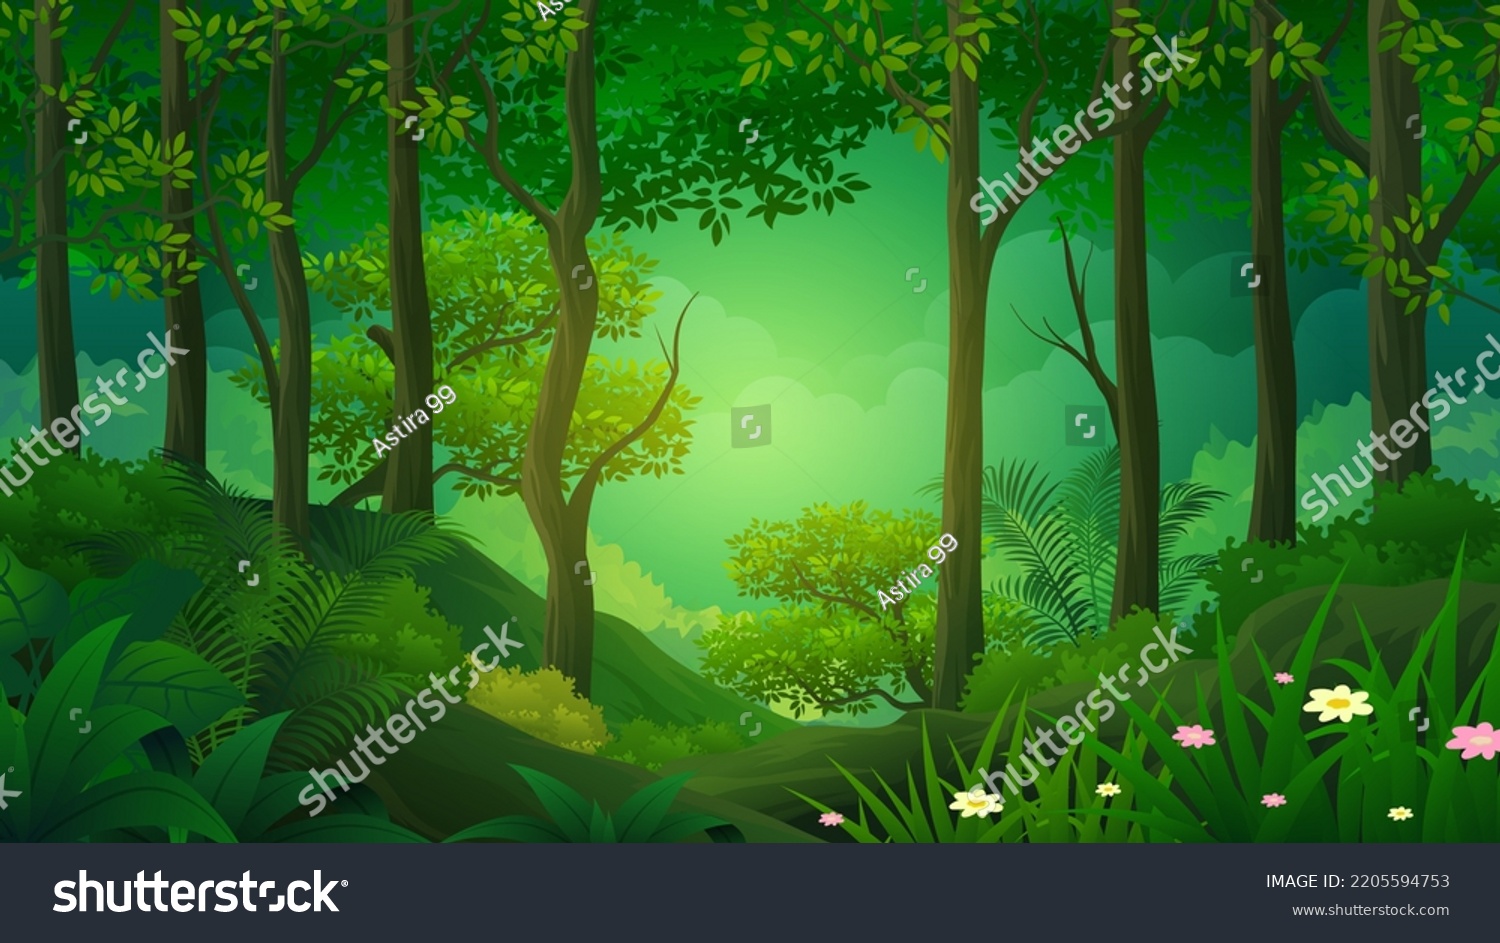 Wild dark jungle forest nature landscape with green jungle foliage and exotic plants #2205594753